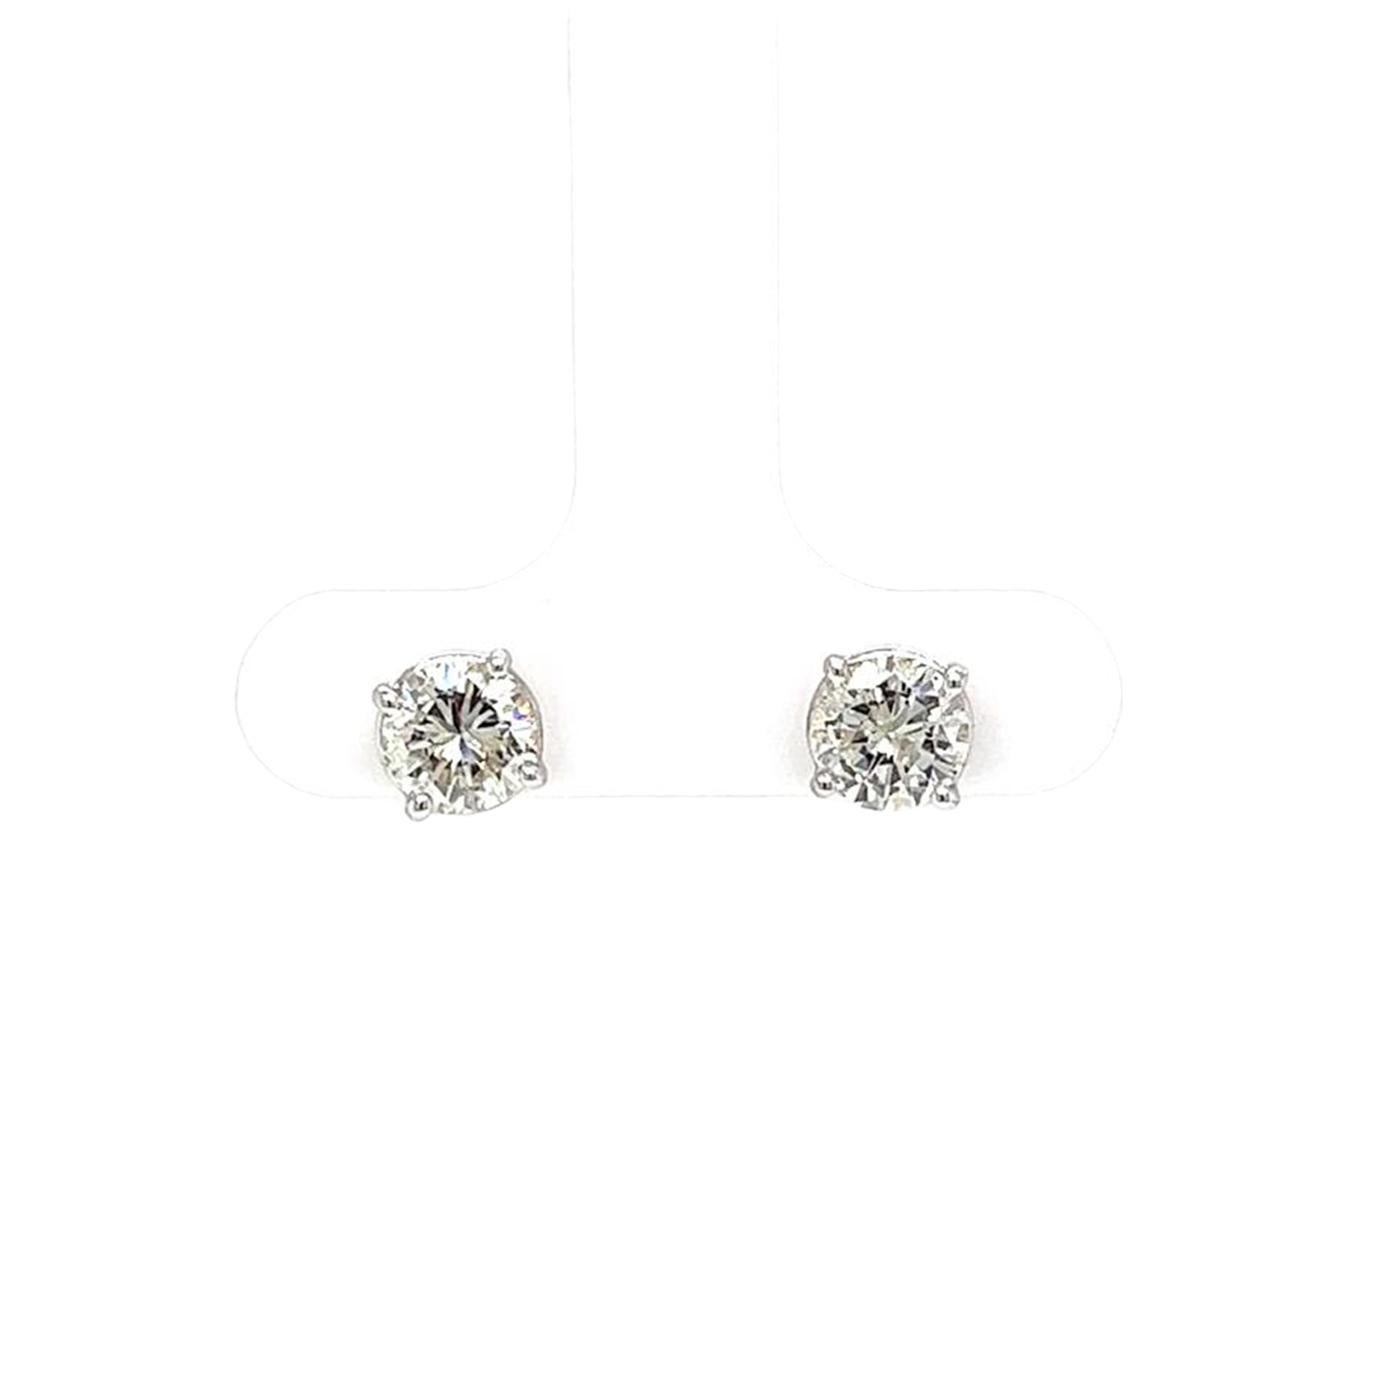 Round Cut 1.06t 4 Prong Basket Setting Natural Round Diamond Earrings in 14K White Gold For Sale